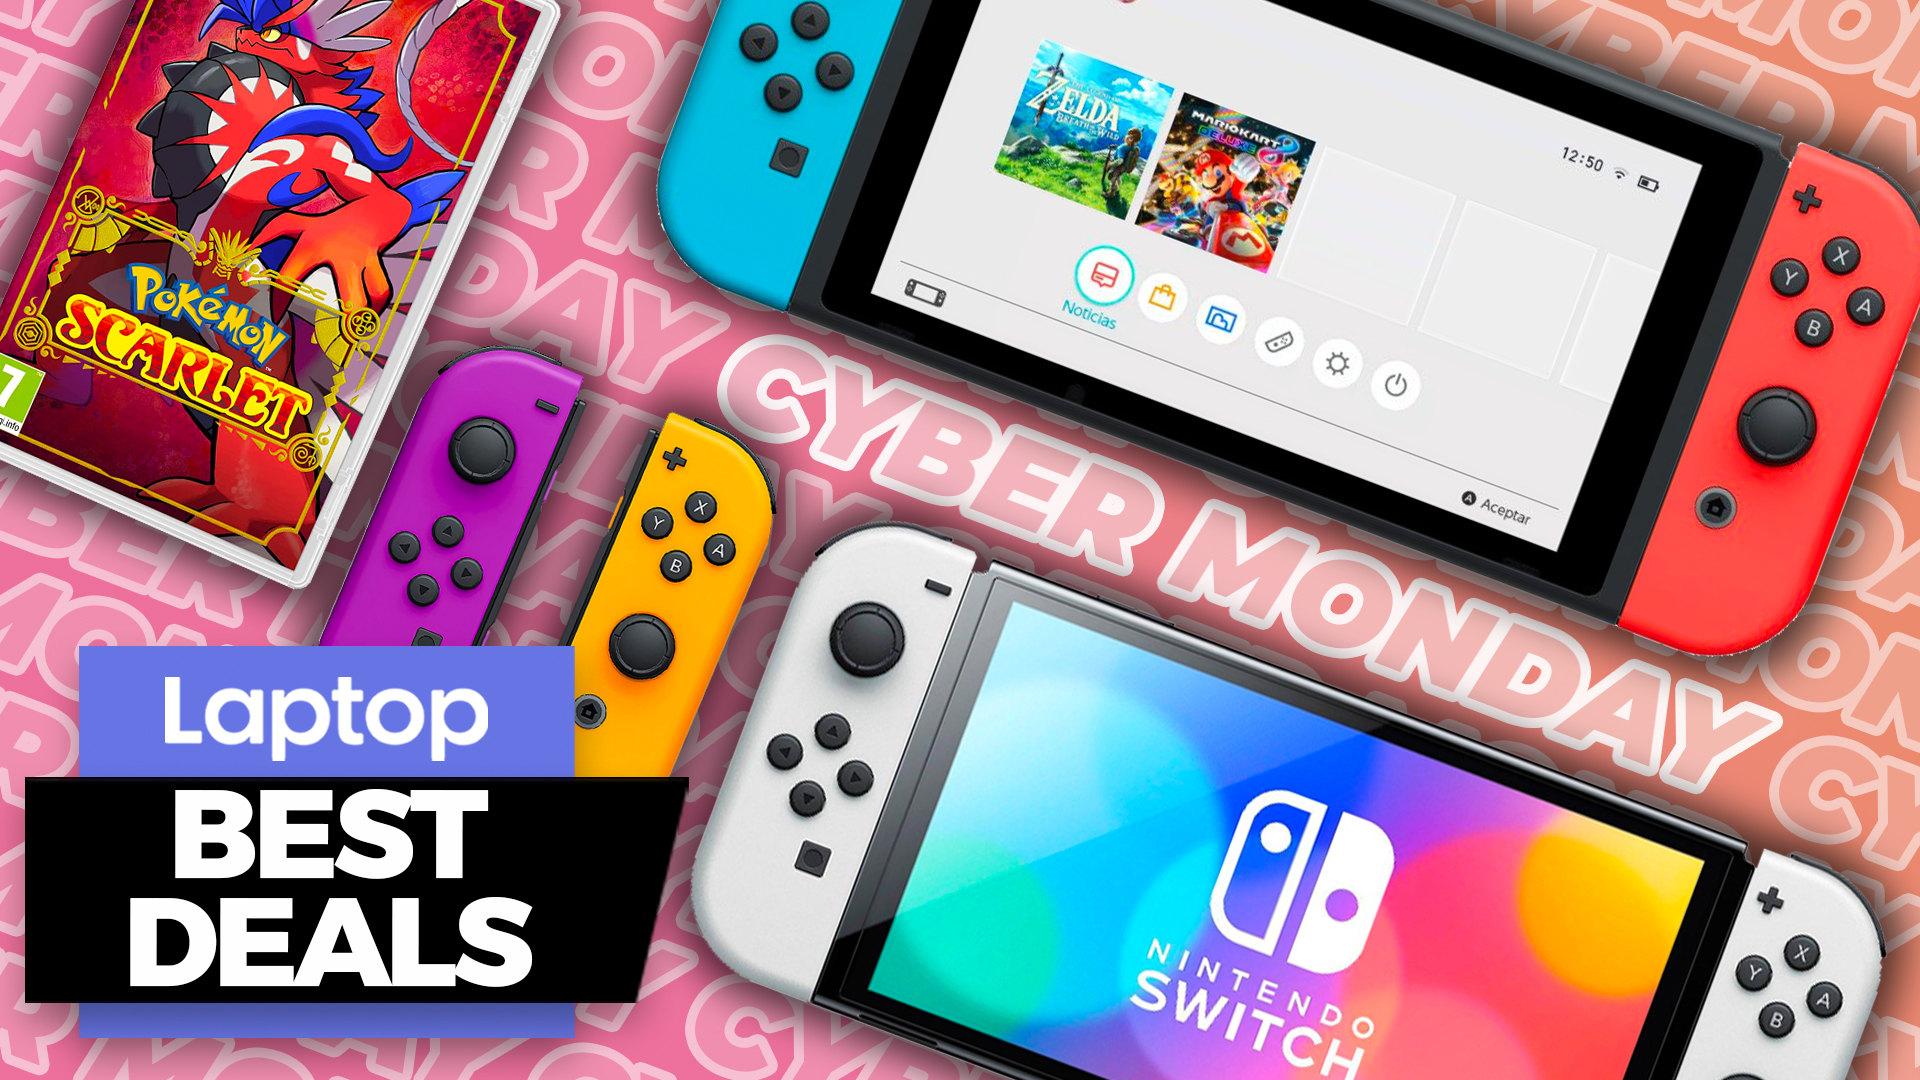 Nintendo Switch Post-Cyber Monday Deals: Games, Consoles, and